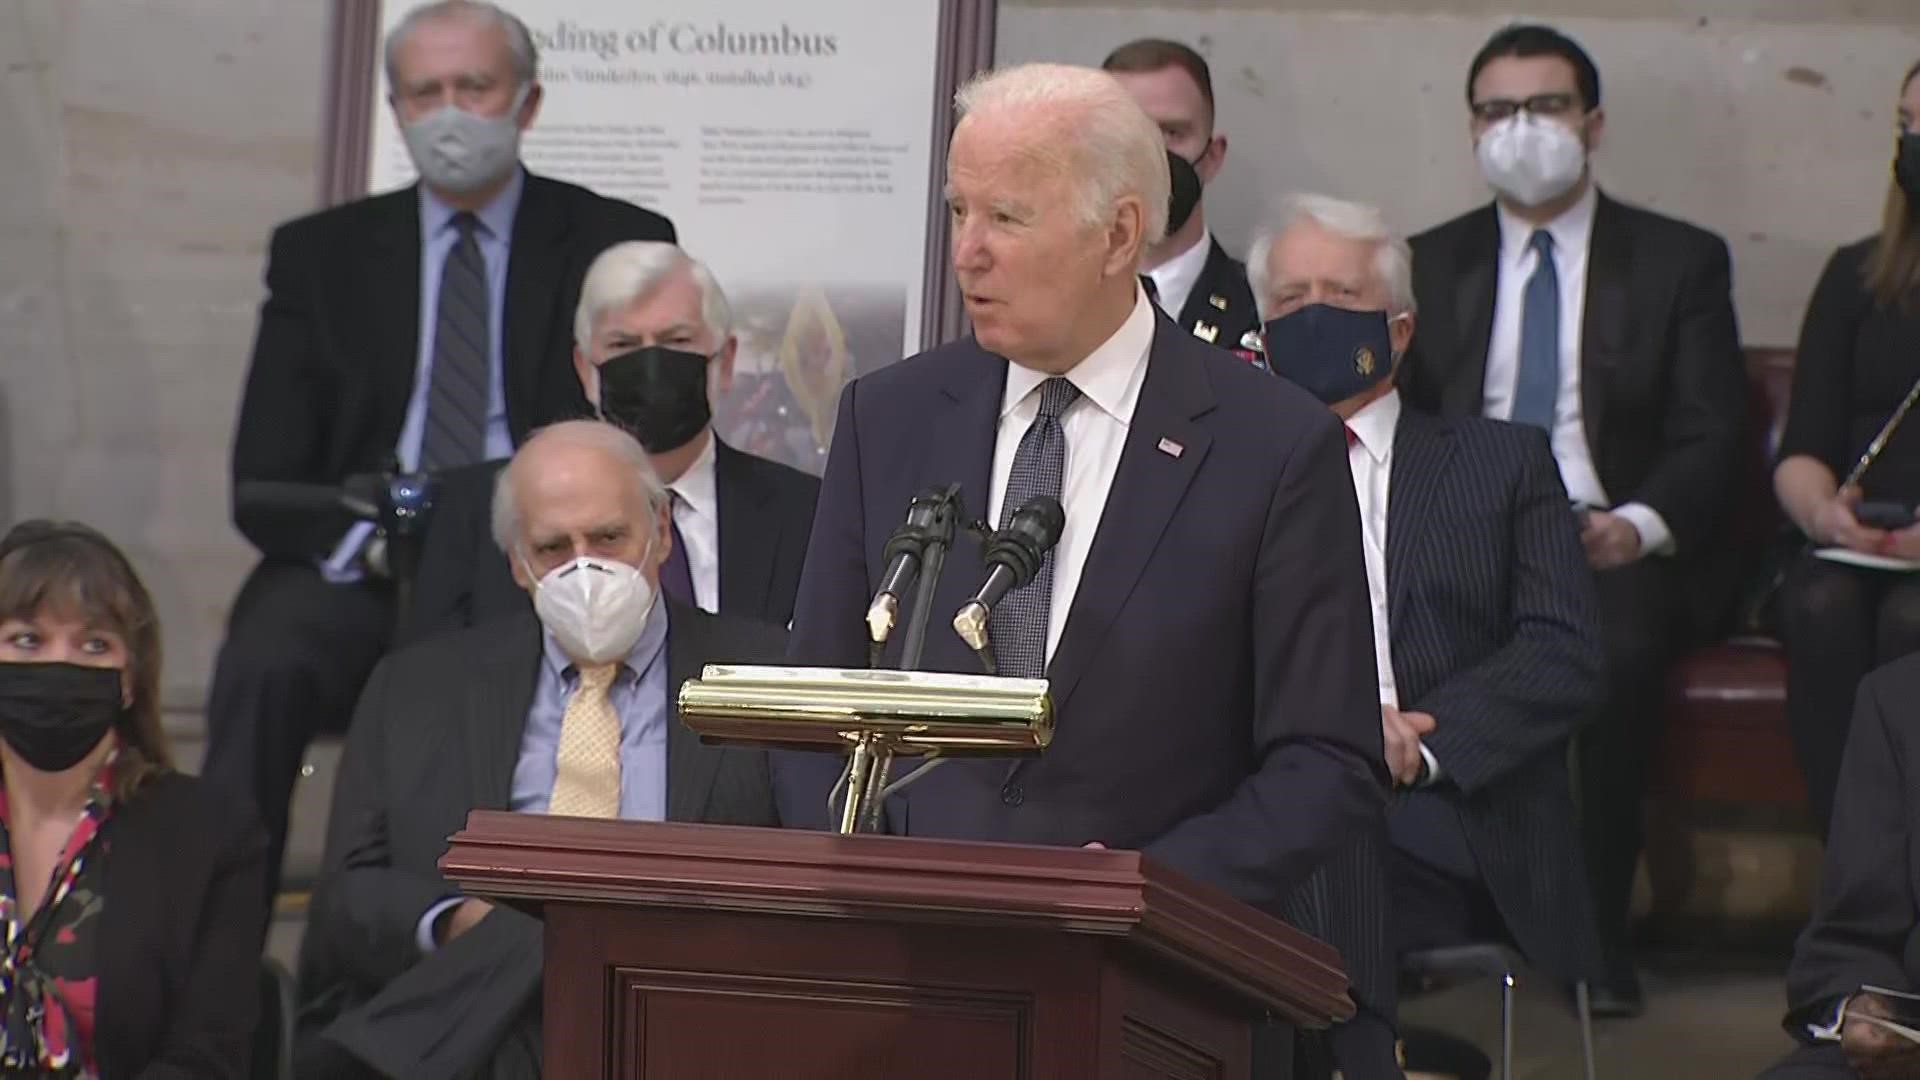 As part of his tribute to Bob Dole, President Joe Biden read part of the former Republican senator's final message to this country.